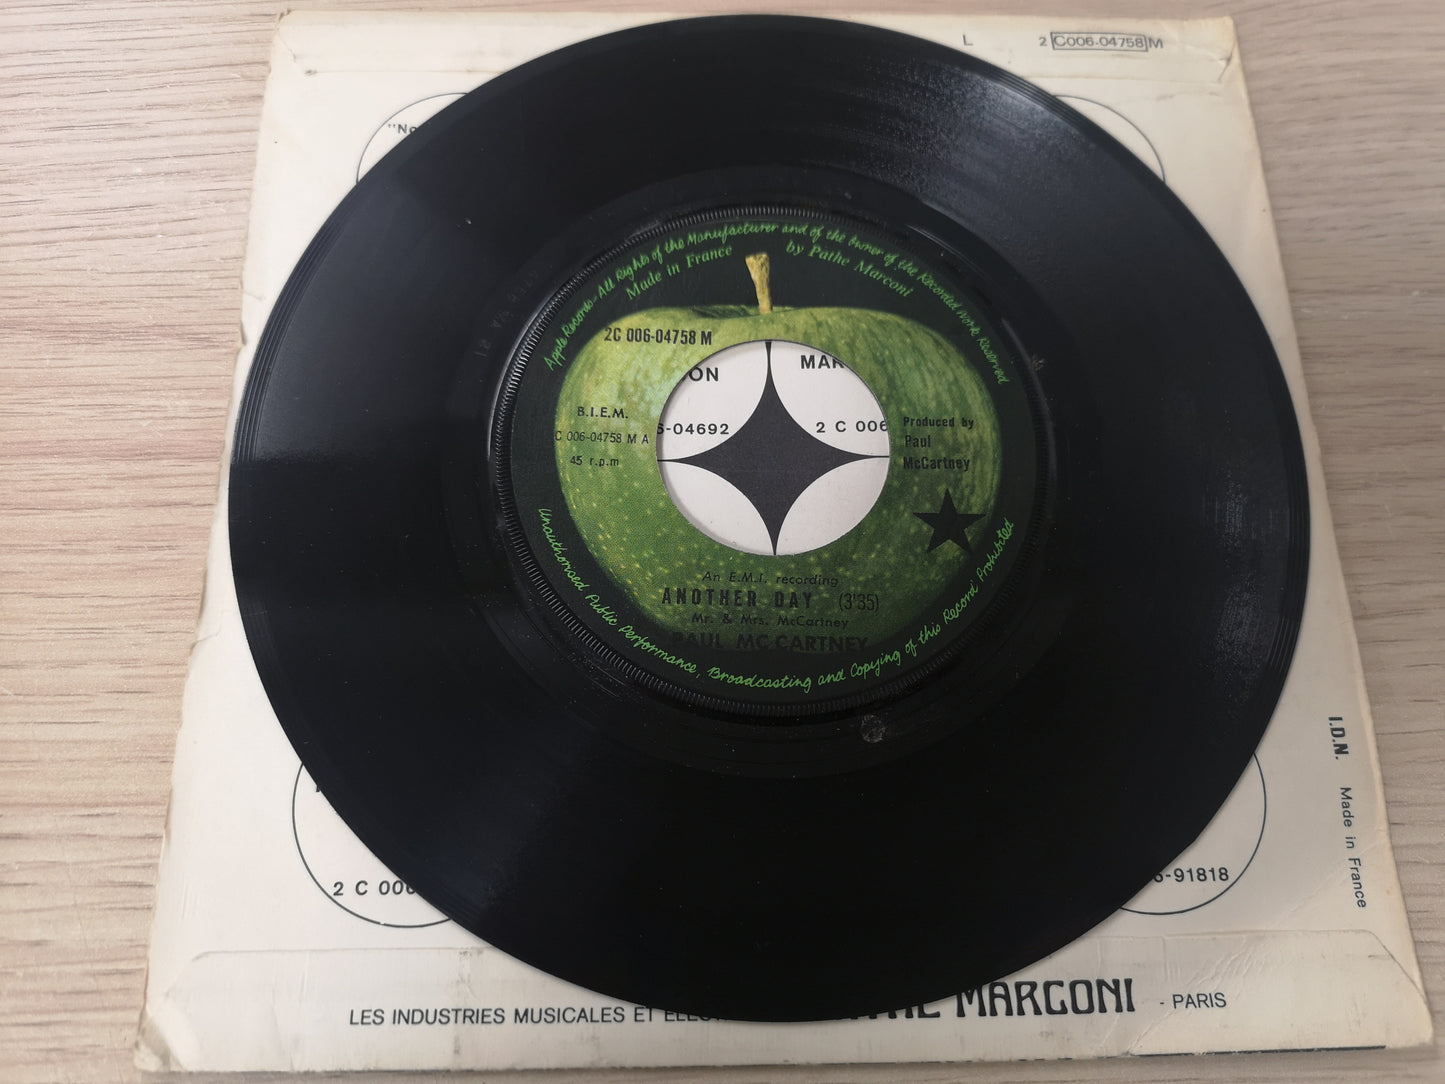 Paul McCartney "Another Day" Orig France 1971 EX/EX (7" Single)